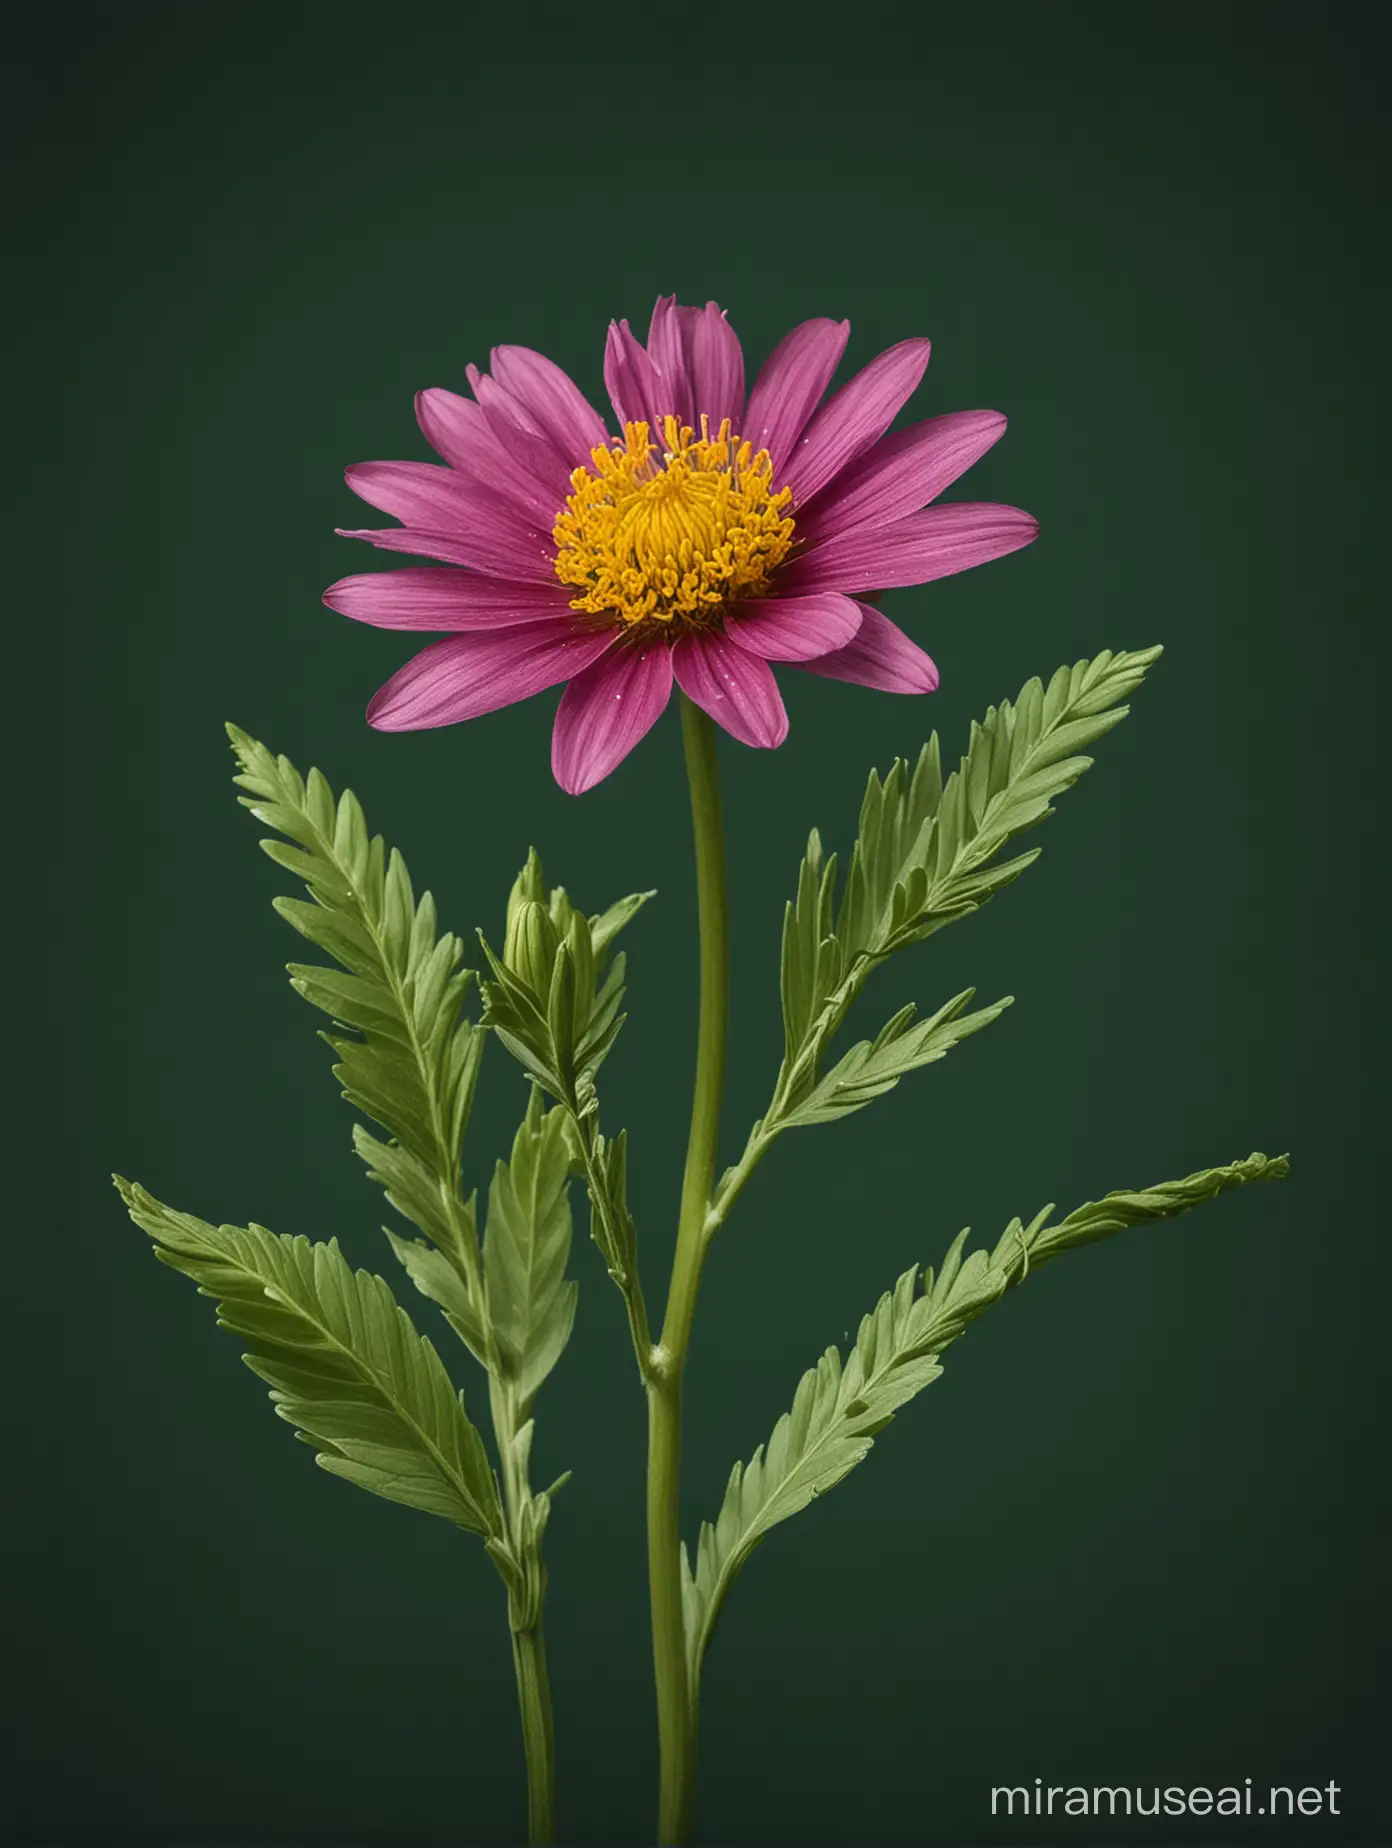 Natural Wildflowers on a Dark Green Background